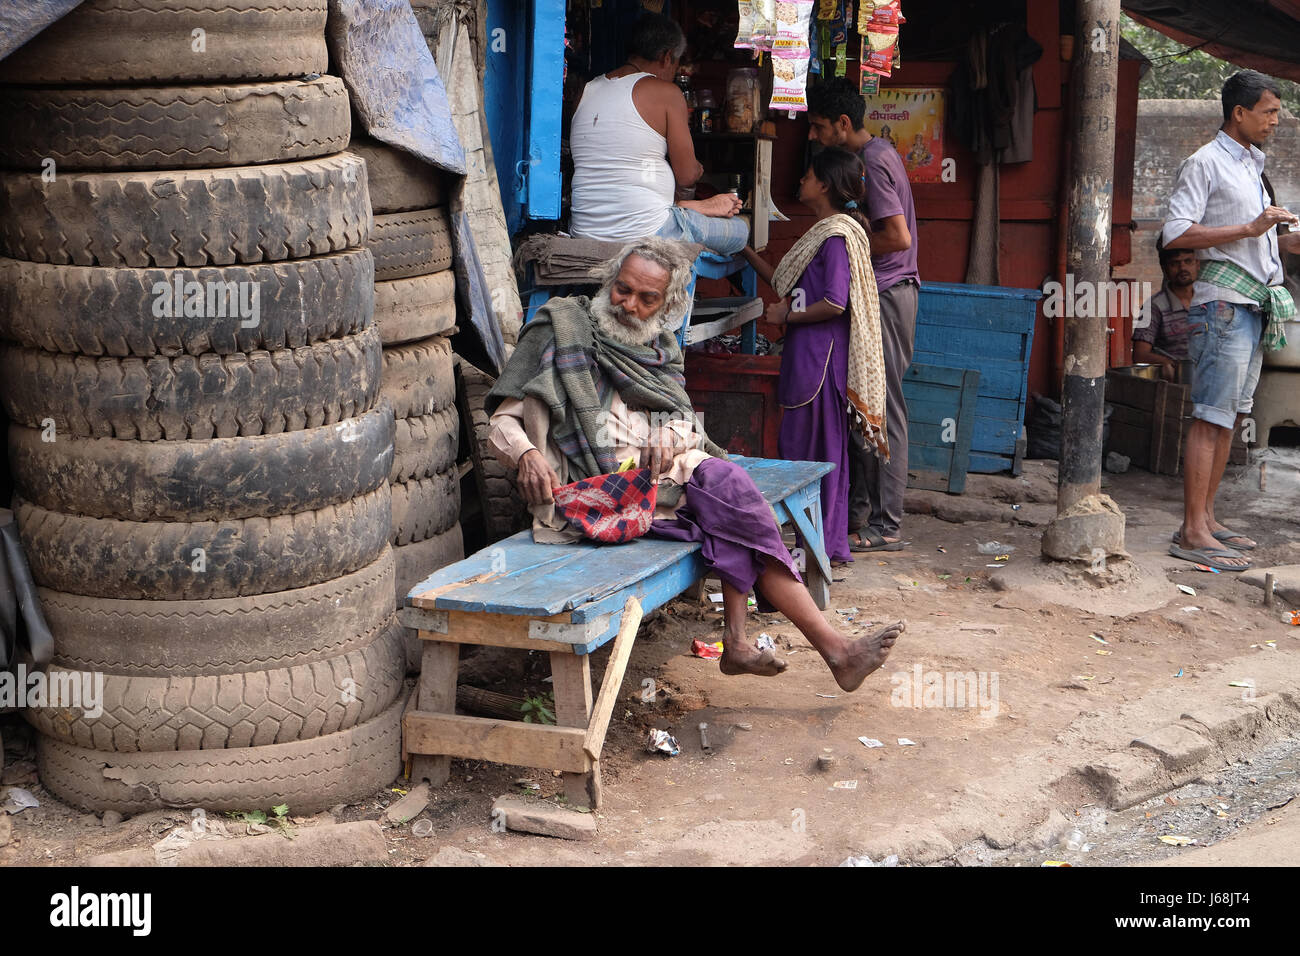 A homeless person on the streets of Topsia, people who can only sustain themselves through begging. Kolkata, India on Fe Stock Photo